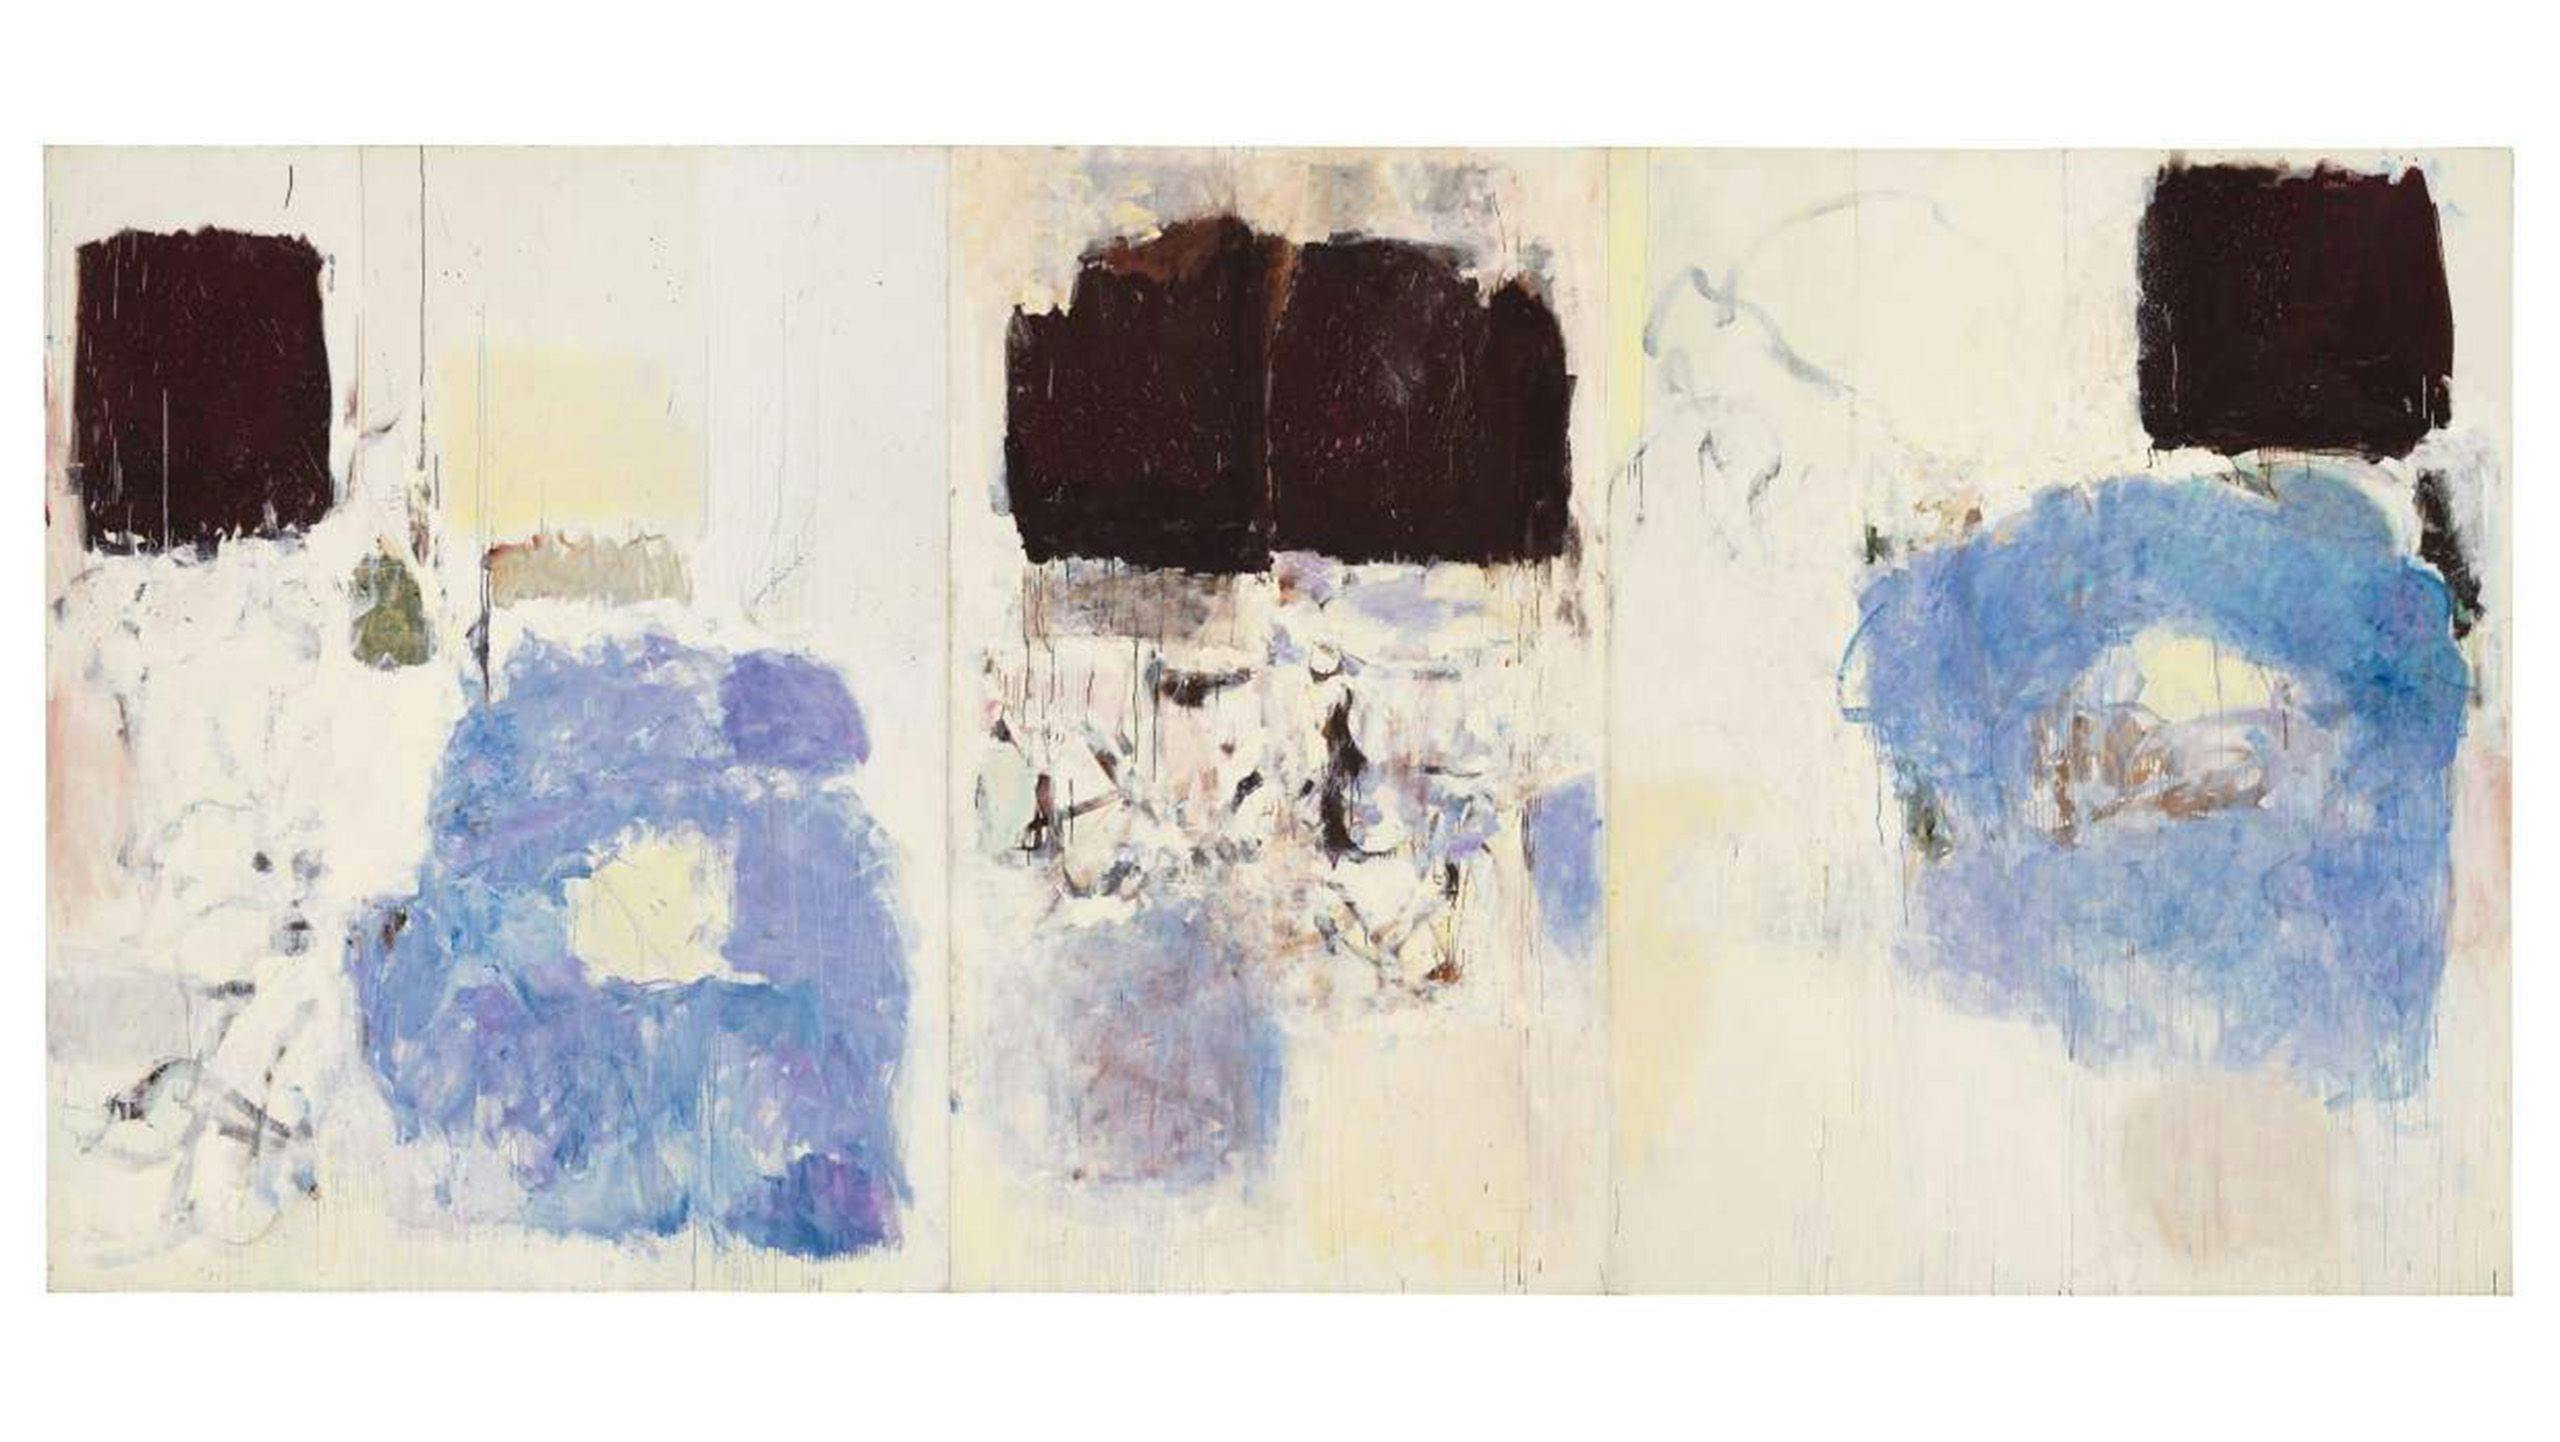 A painting by Joan Mitchell titled "Clearing," dated 1973